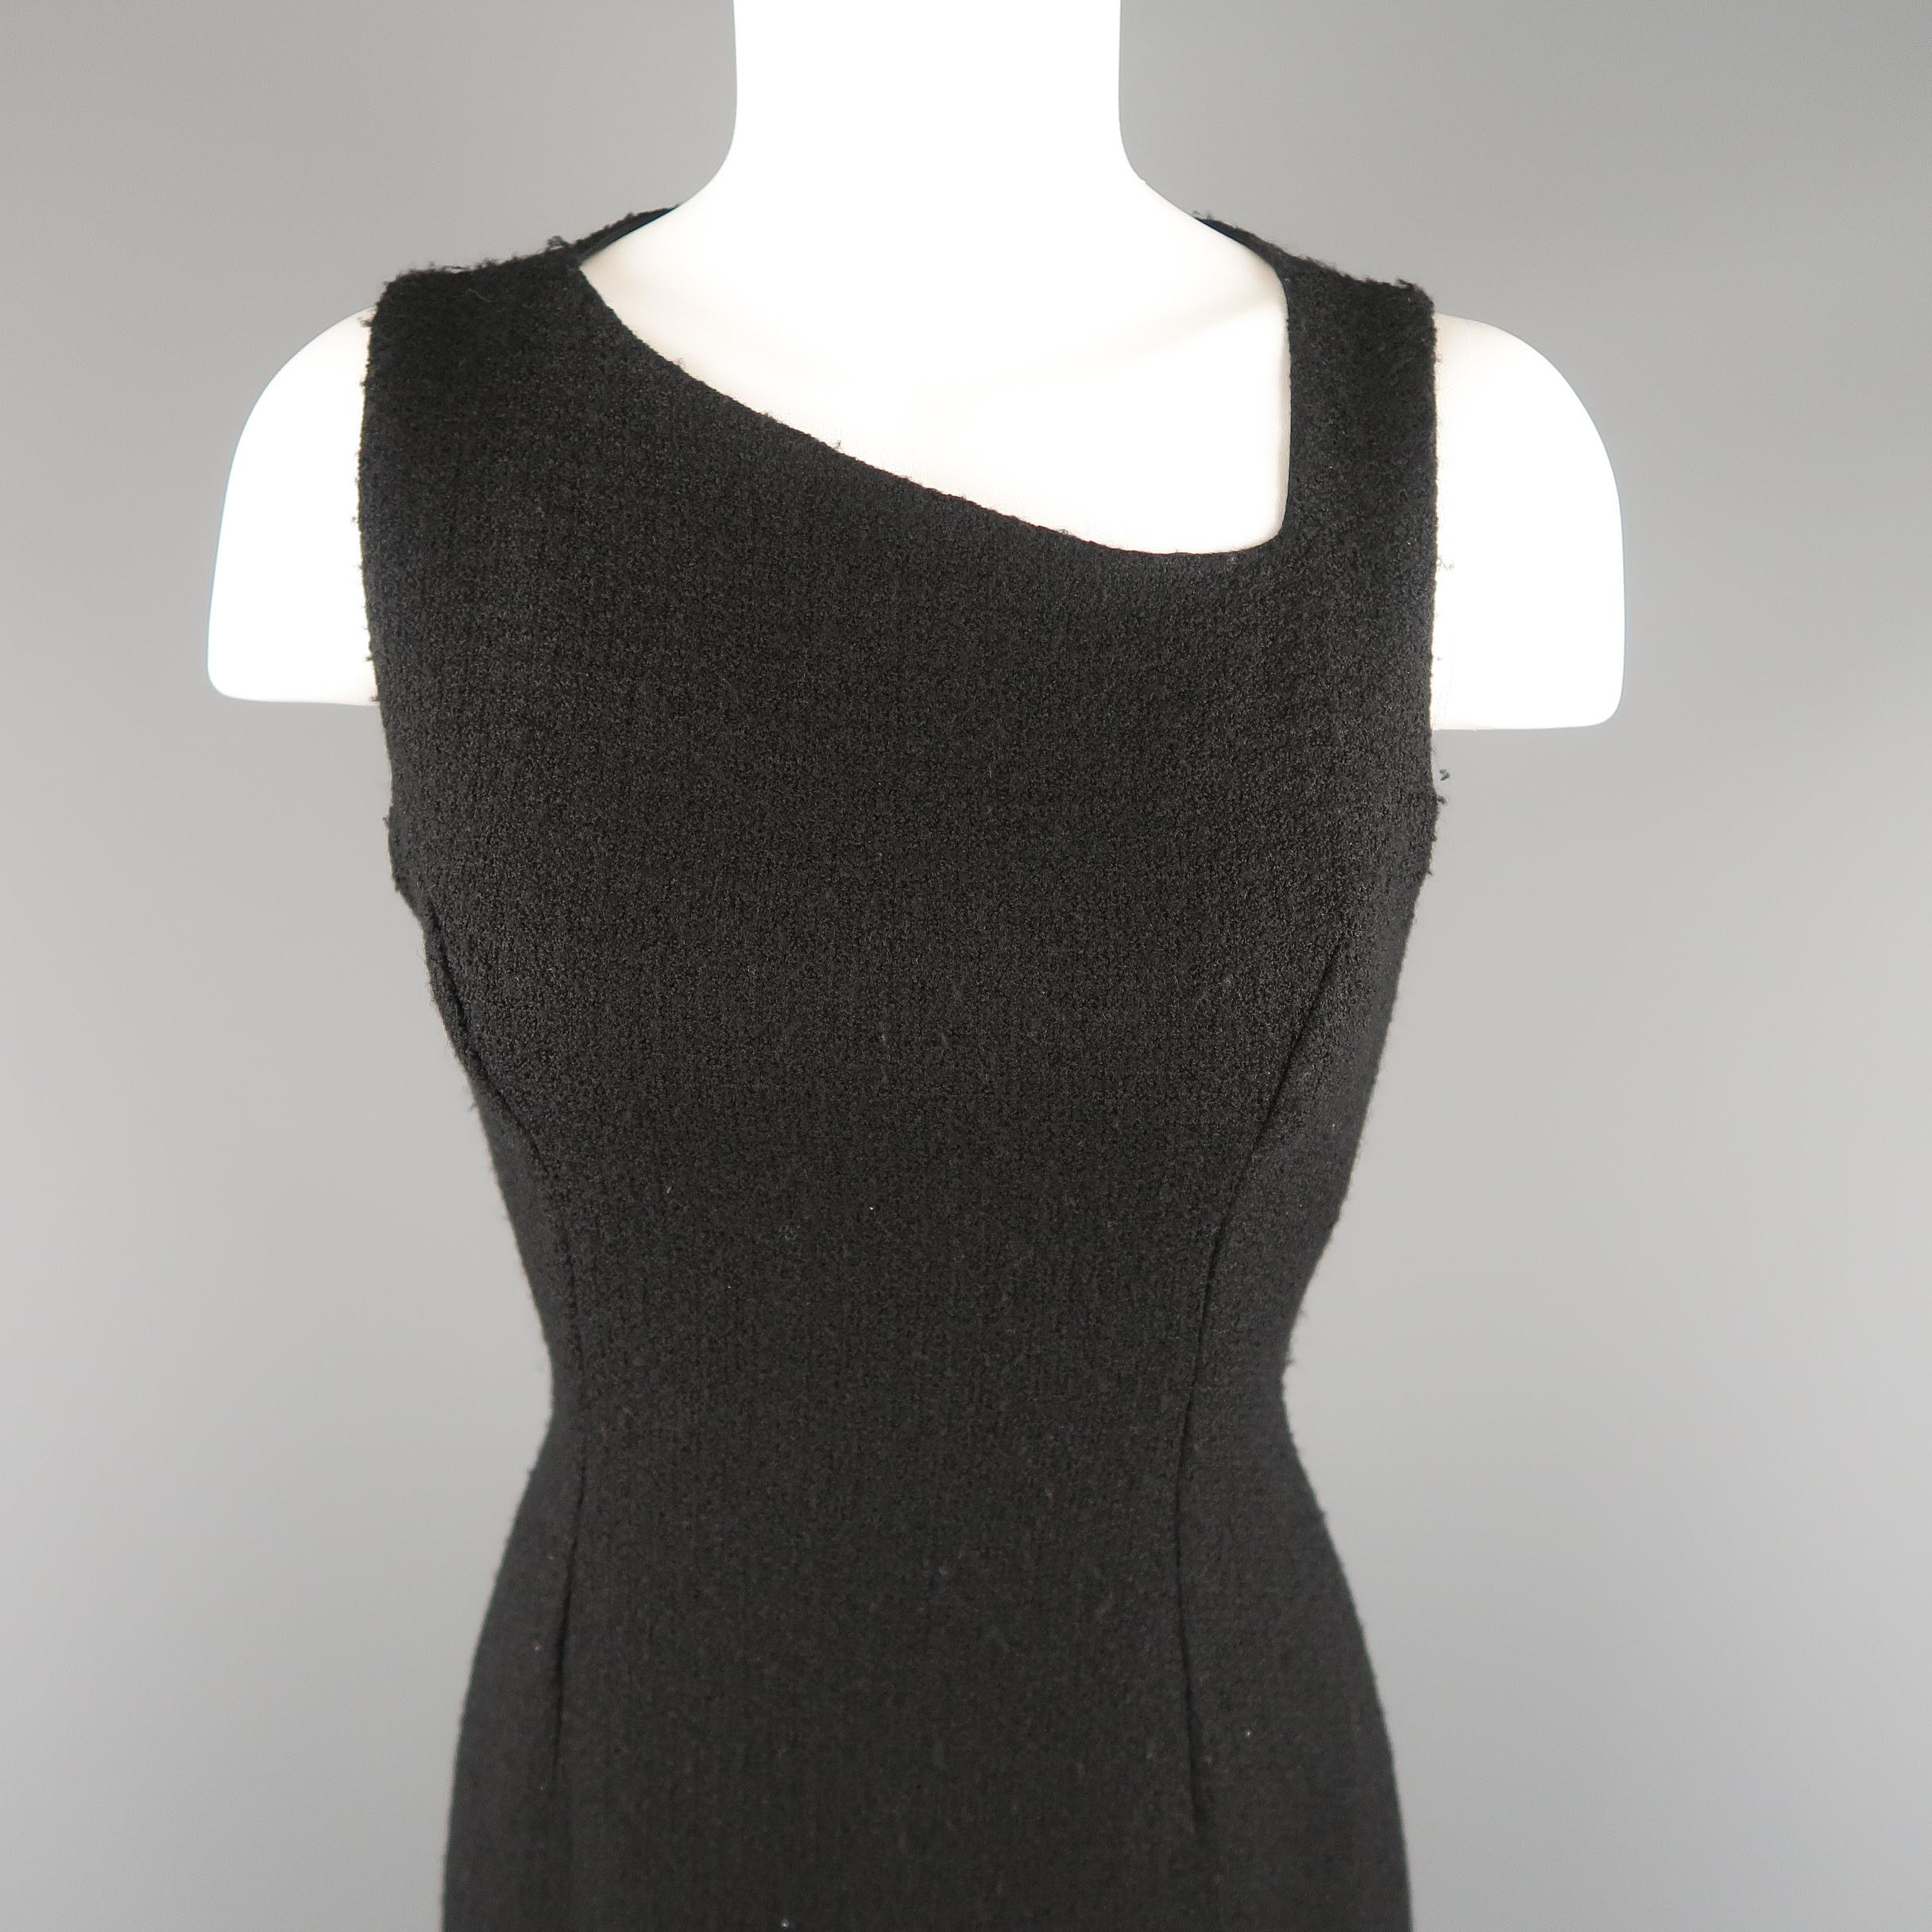 Vintage VERSUS by GIANNI VERSACE sheath dress comes in a wool blend tweed with an asymmetrical neckline, fitted silhouette, and side slit. Made in Italy.
 
Good Pre-Owned Condition.
Marked: 26/40
 
Measurements:
 
Shoulder: 12.5 in.
Bust: 35